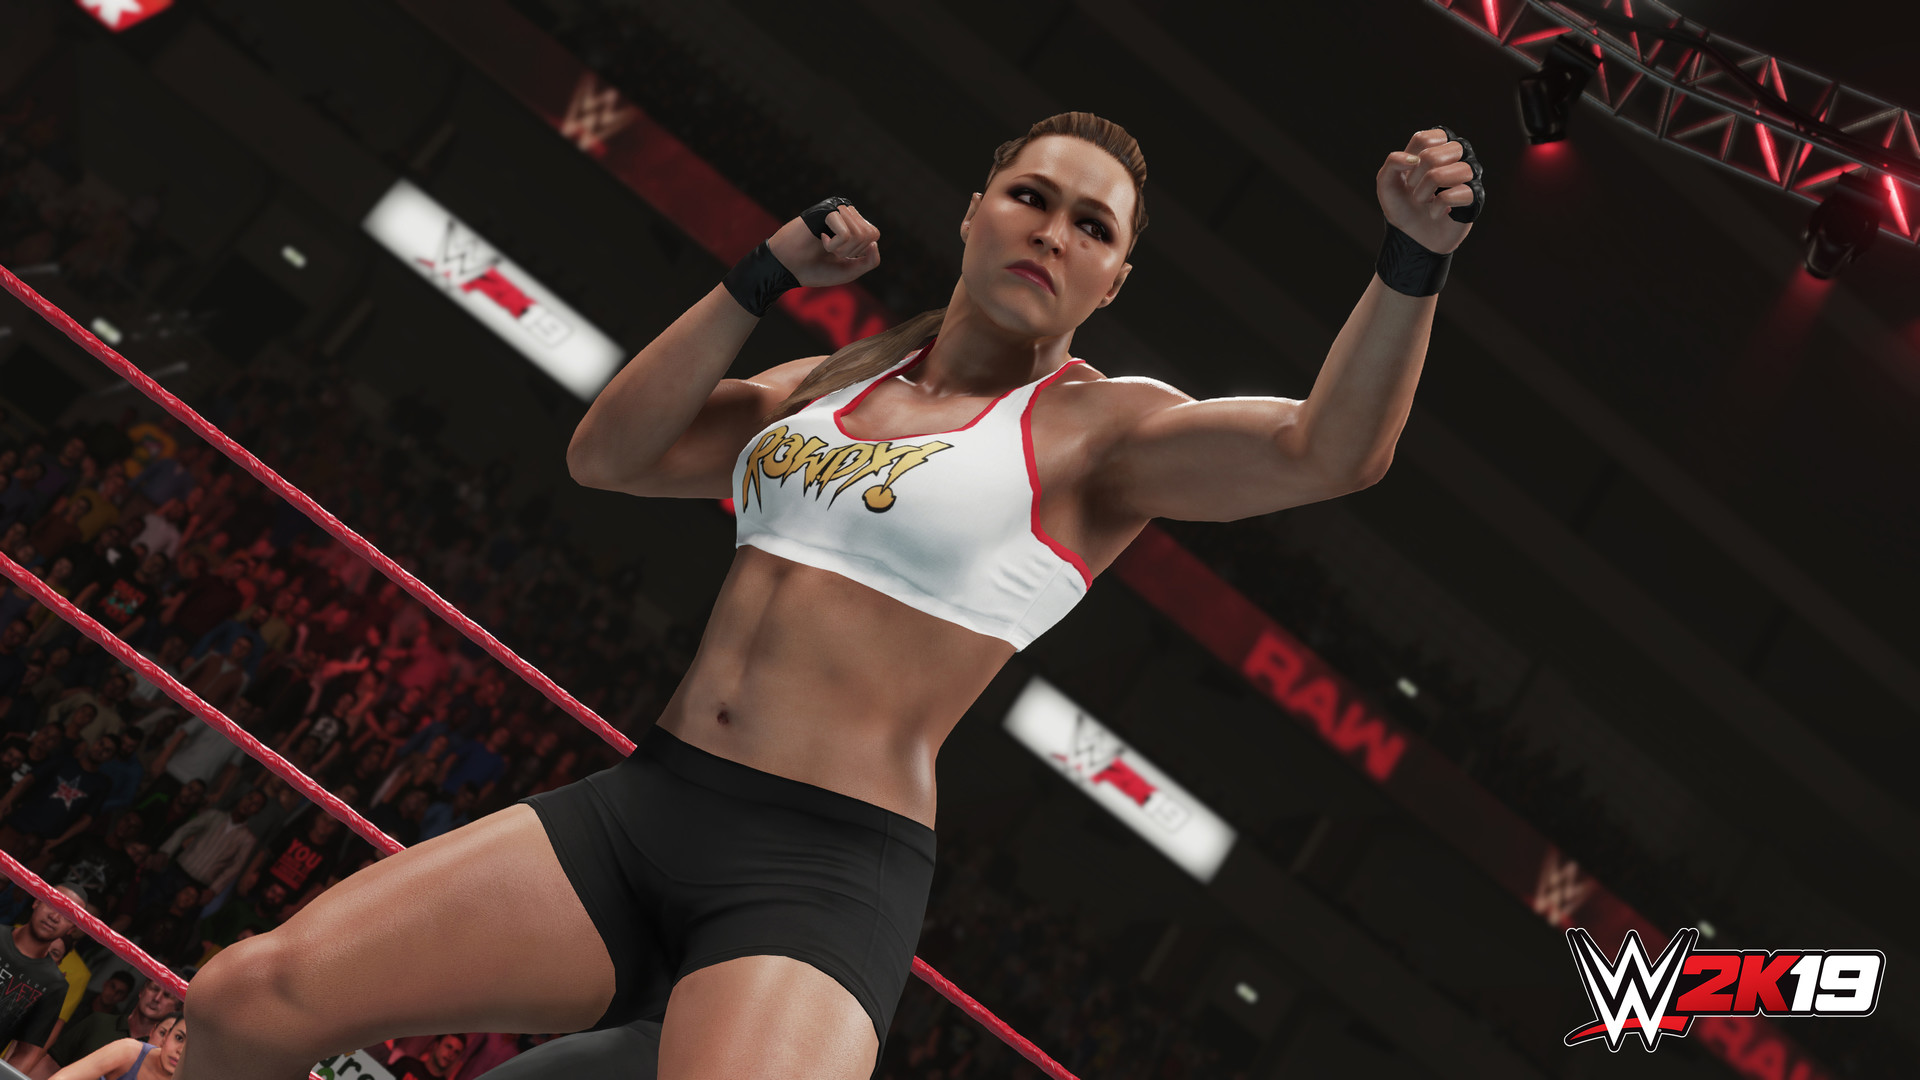 Find the best laptops for WWE 2K19